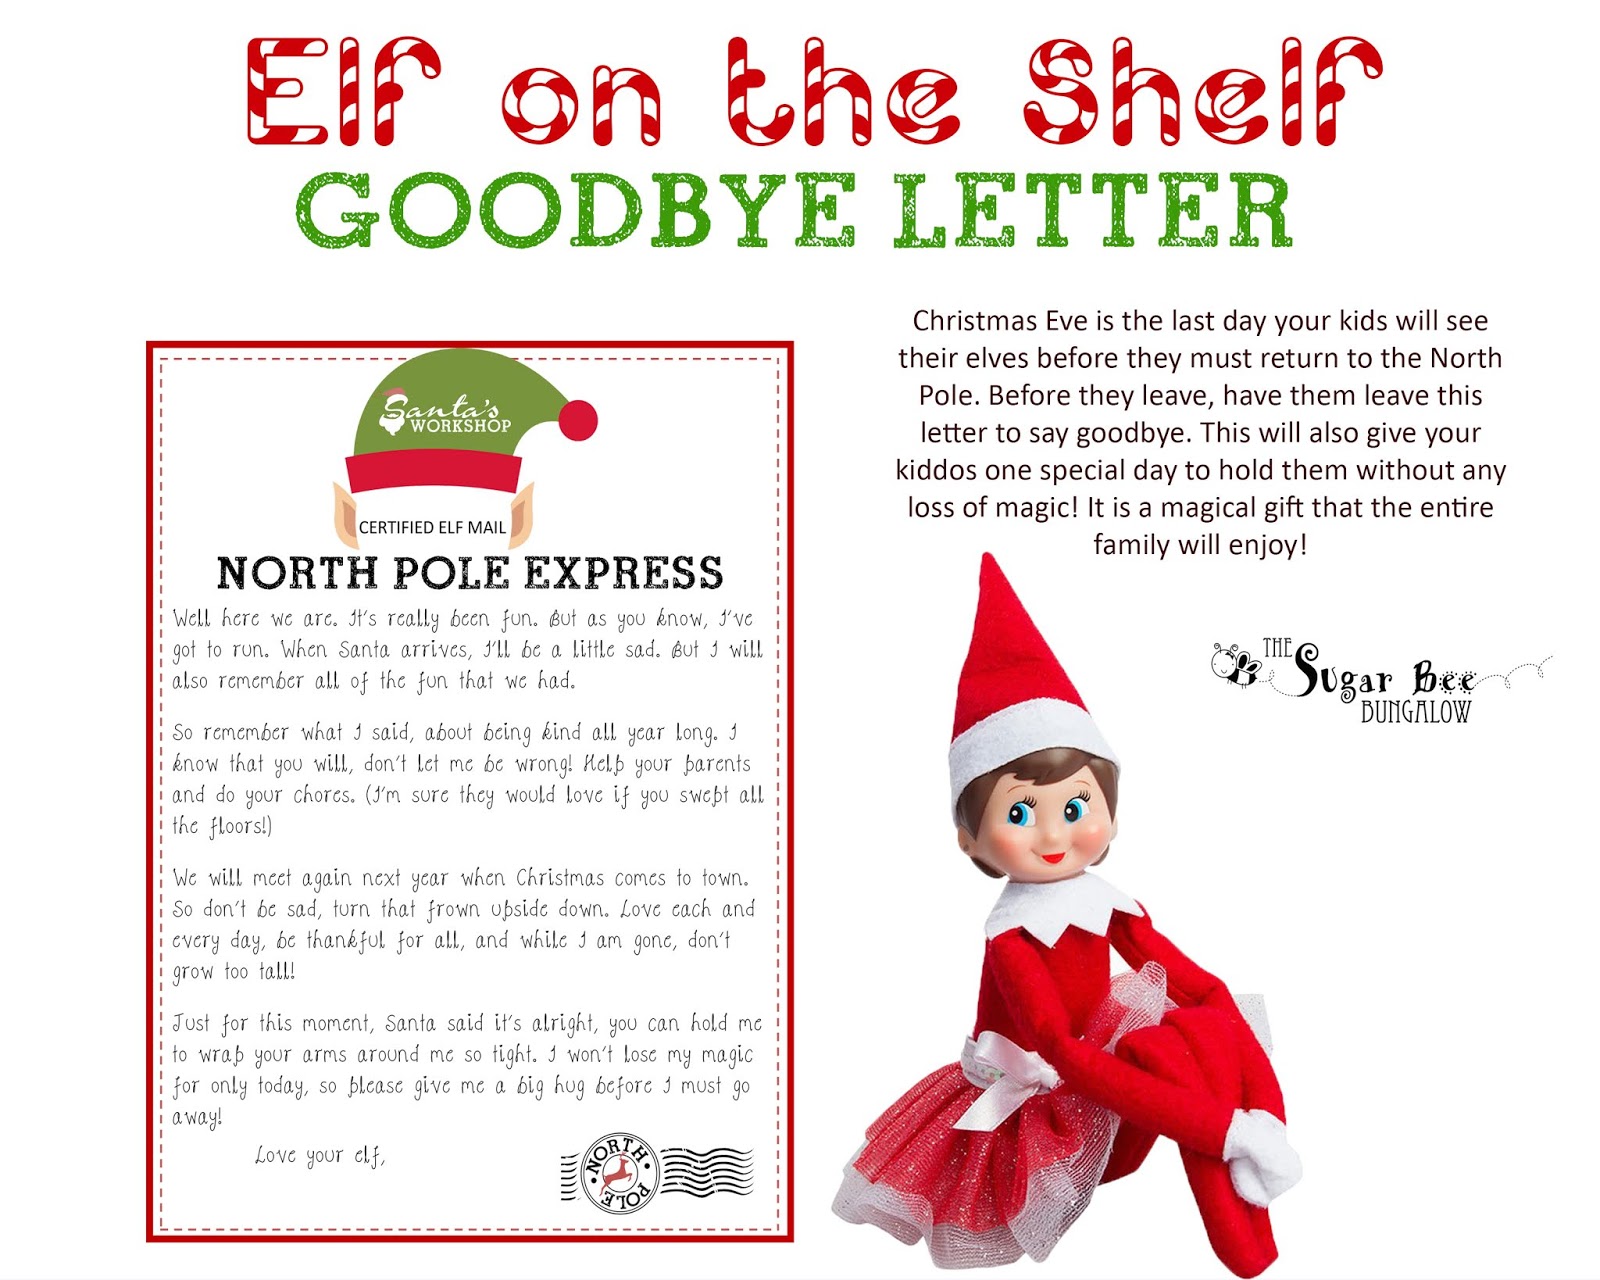 The Sugar Bee Bungalow: {Queen Bee} Elf on the Shelf Goodbye Letter